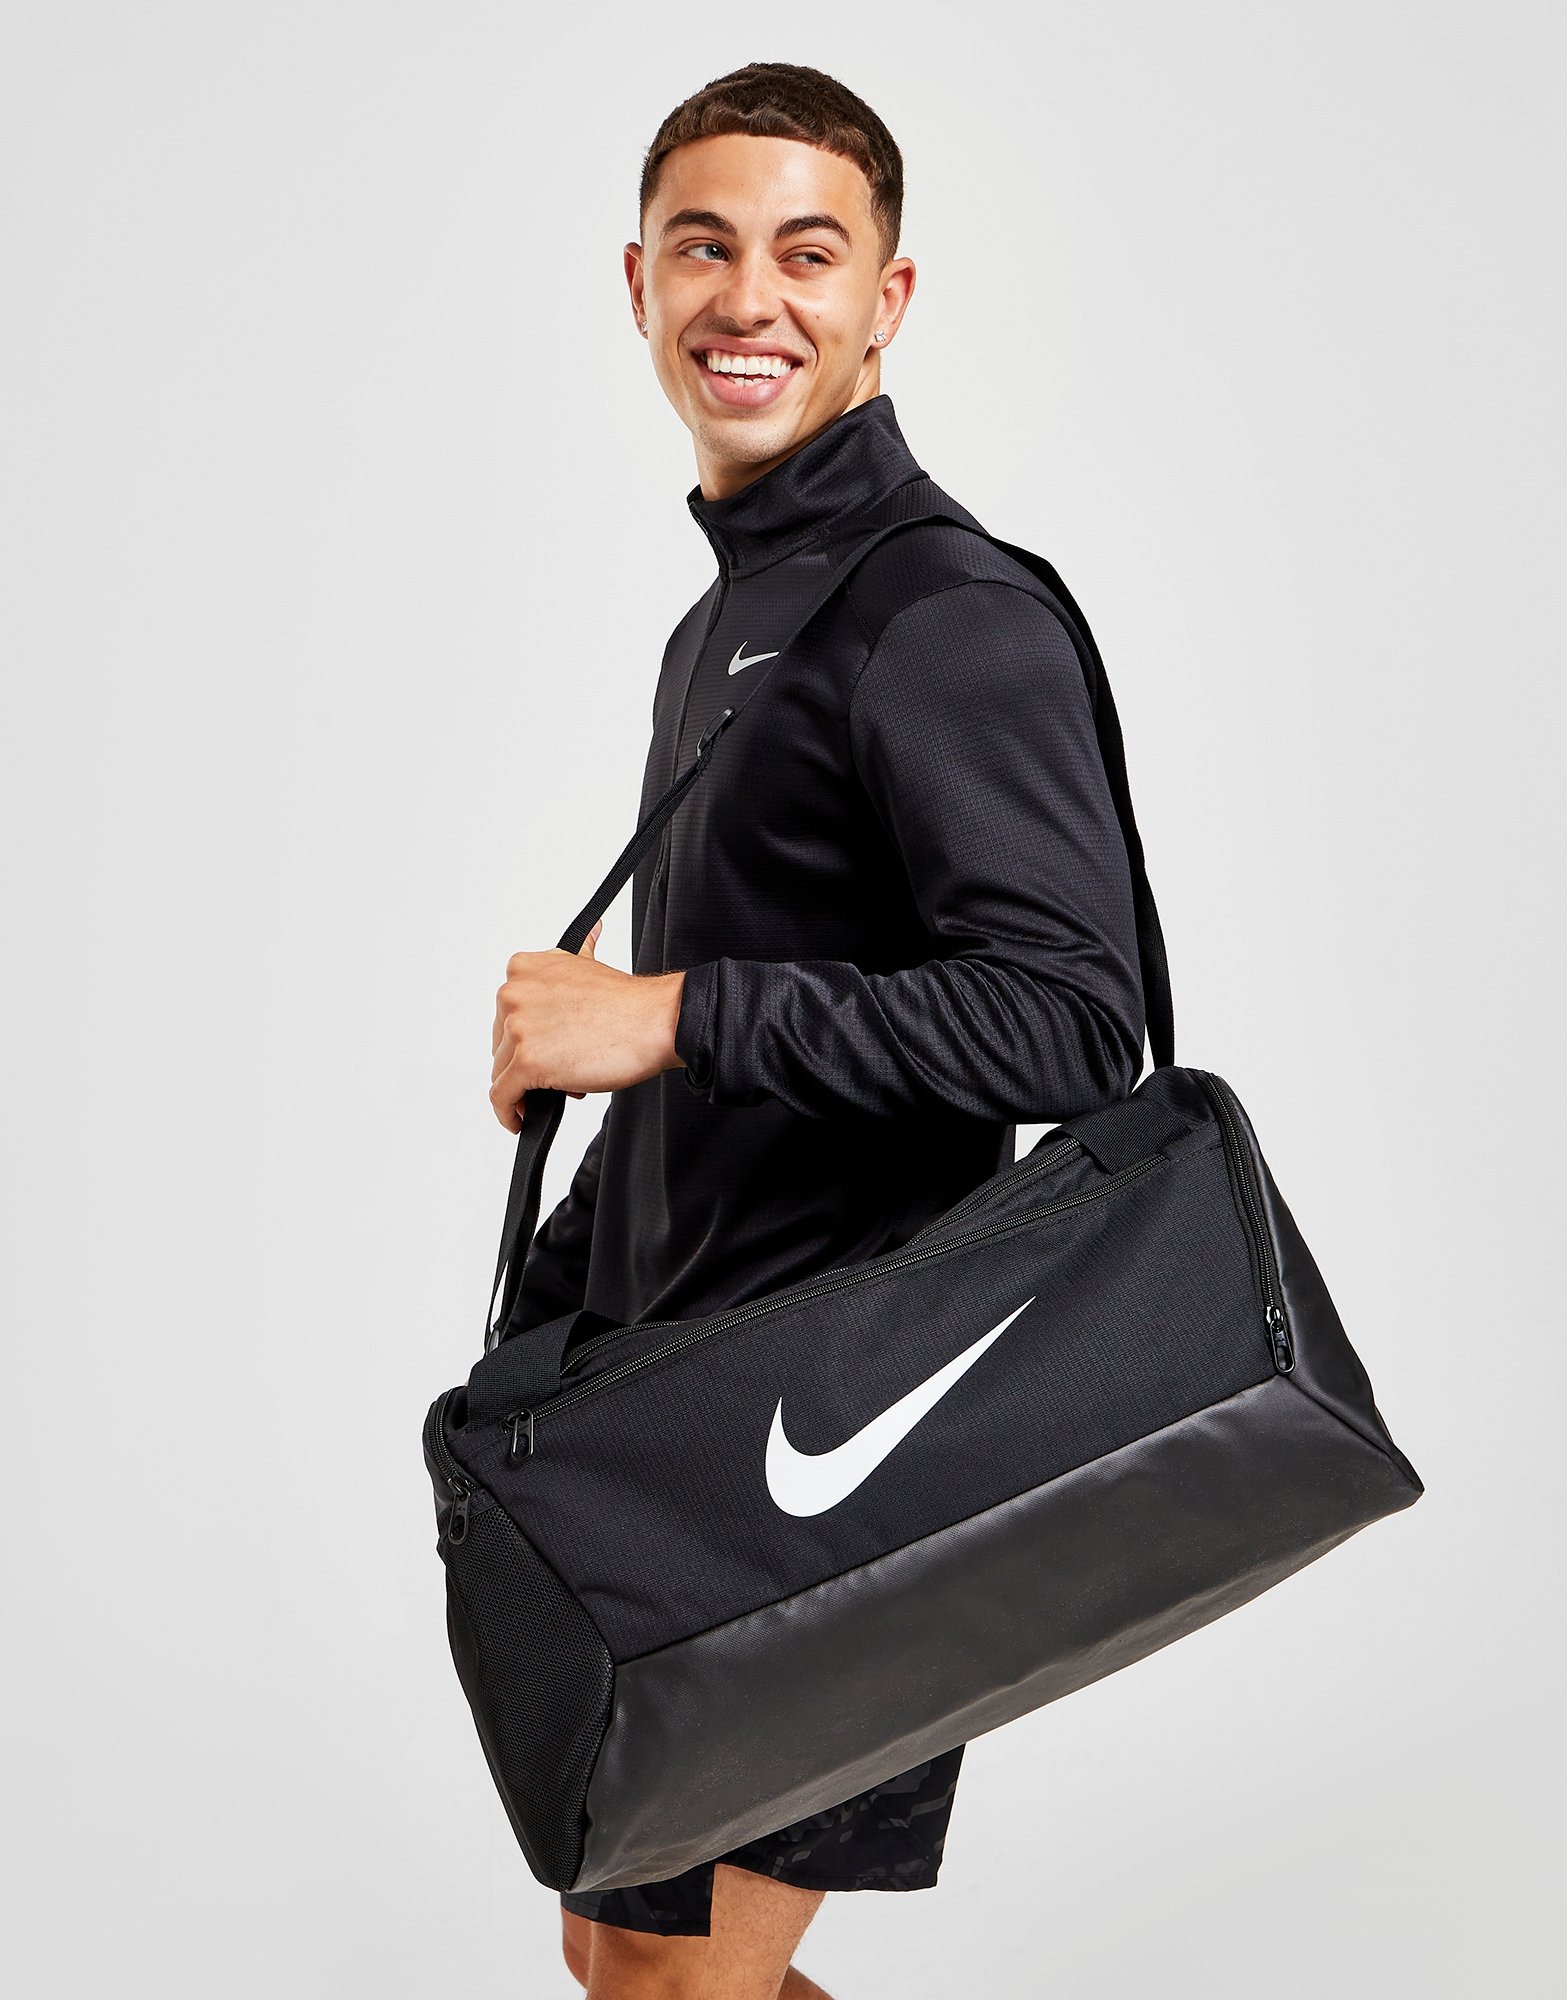 Nike's Stylish One Tote Bag Now at FOOTY, CW9335-113